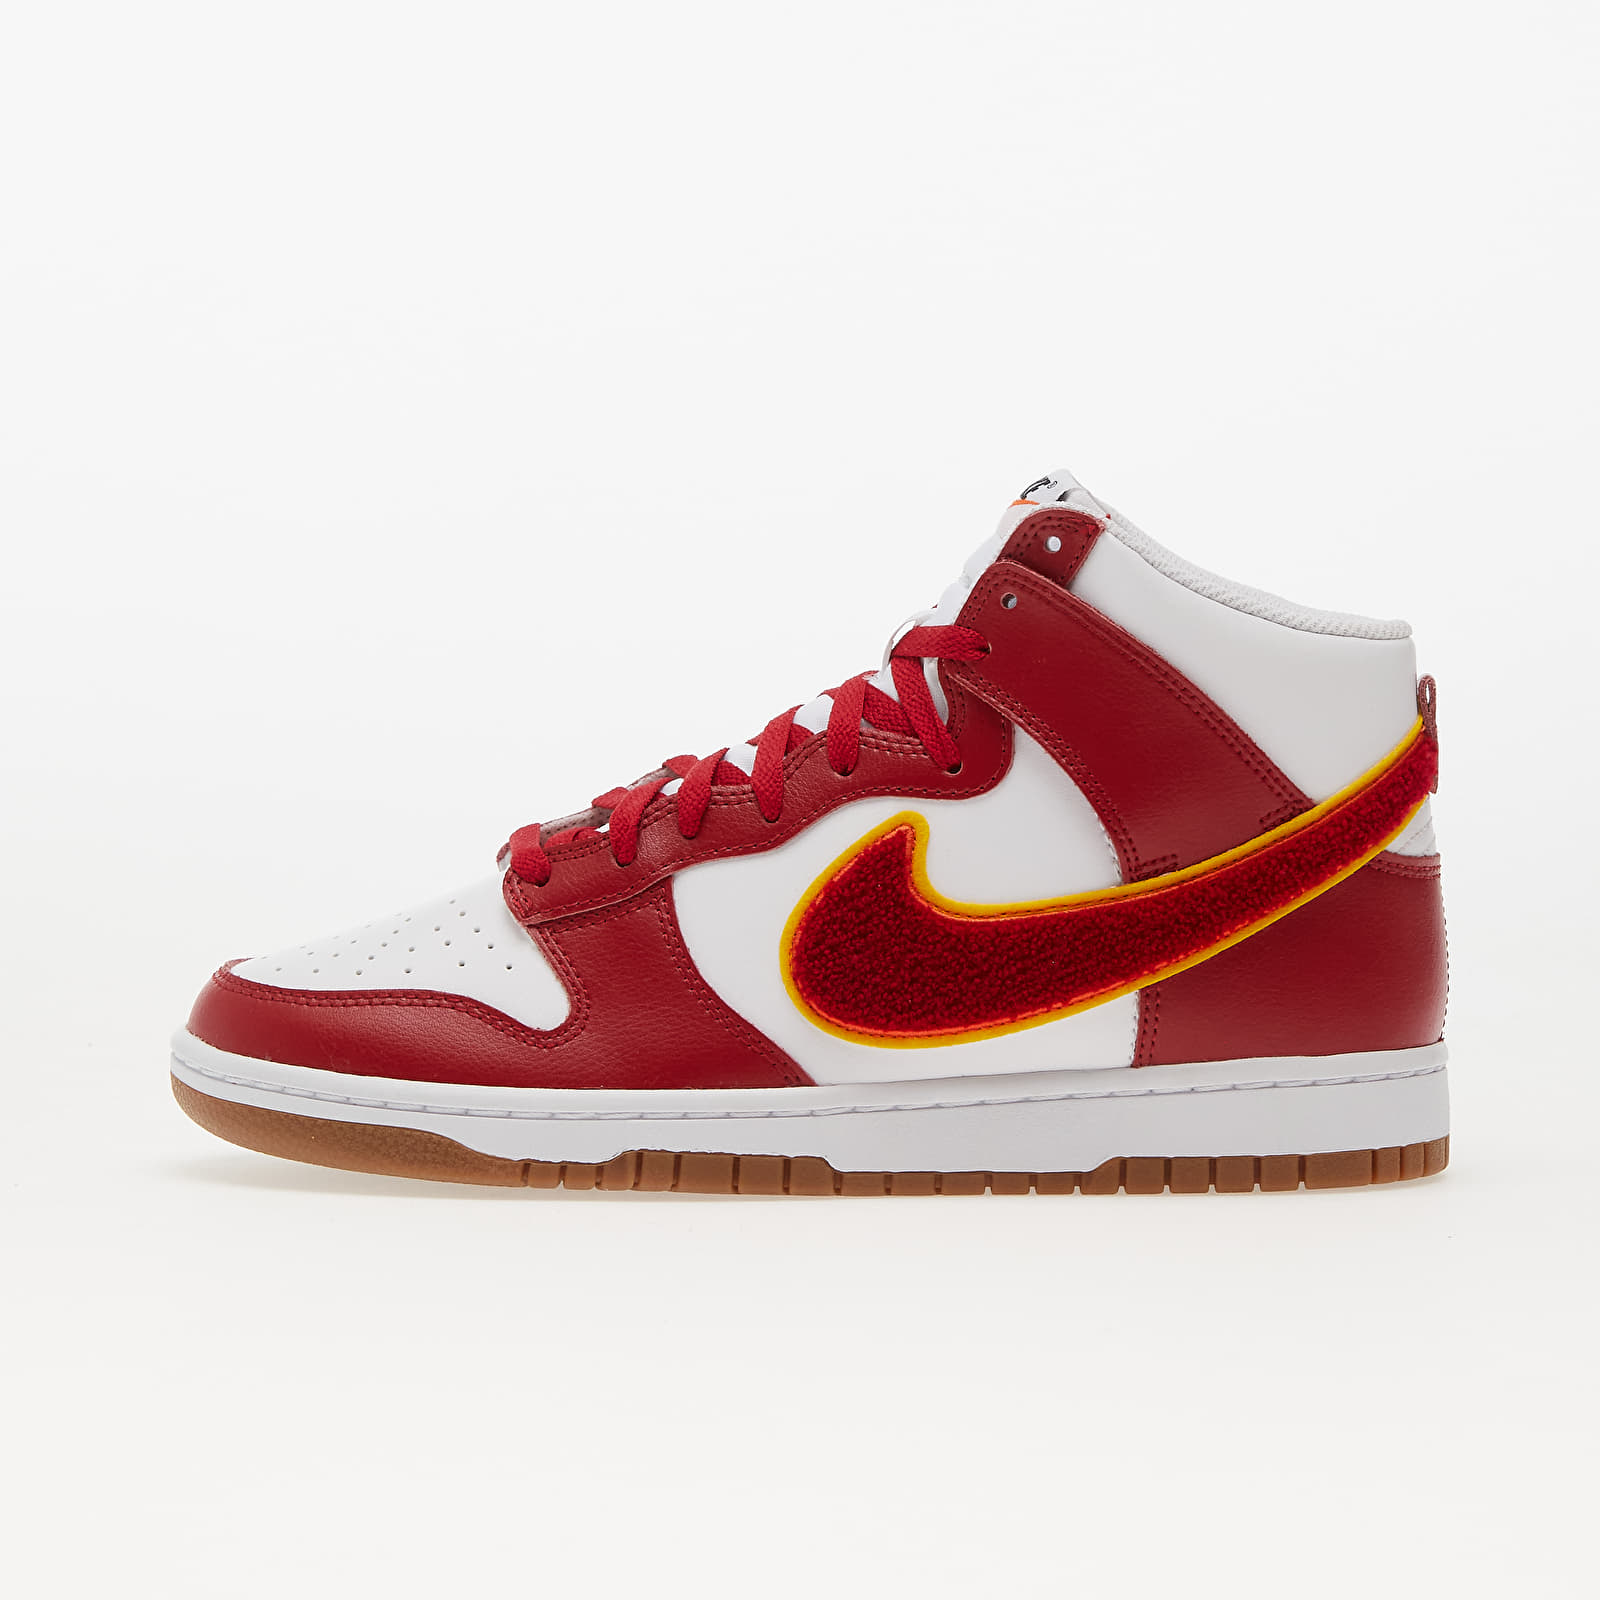 Men's sneakers and shoes Nike Dunk High Retro White/ Gym Red-Yellow Ochre-Gum Med Brown